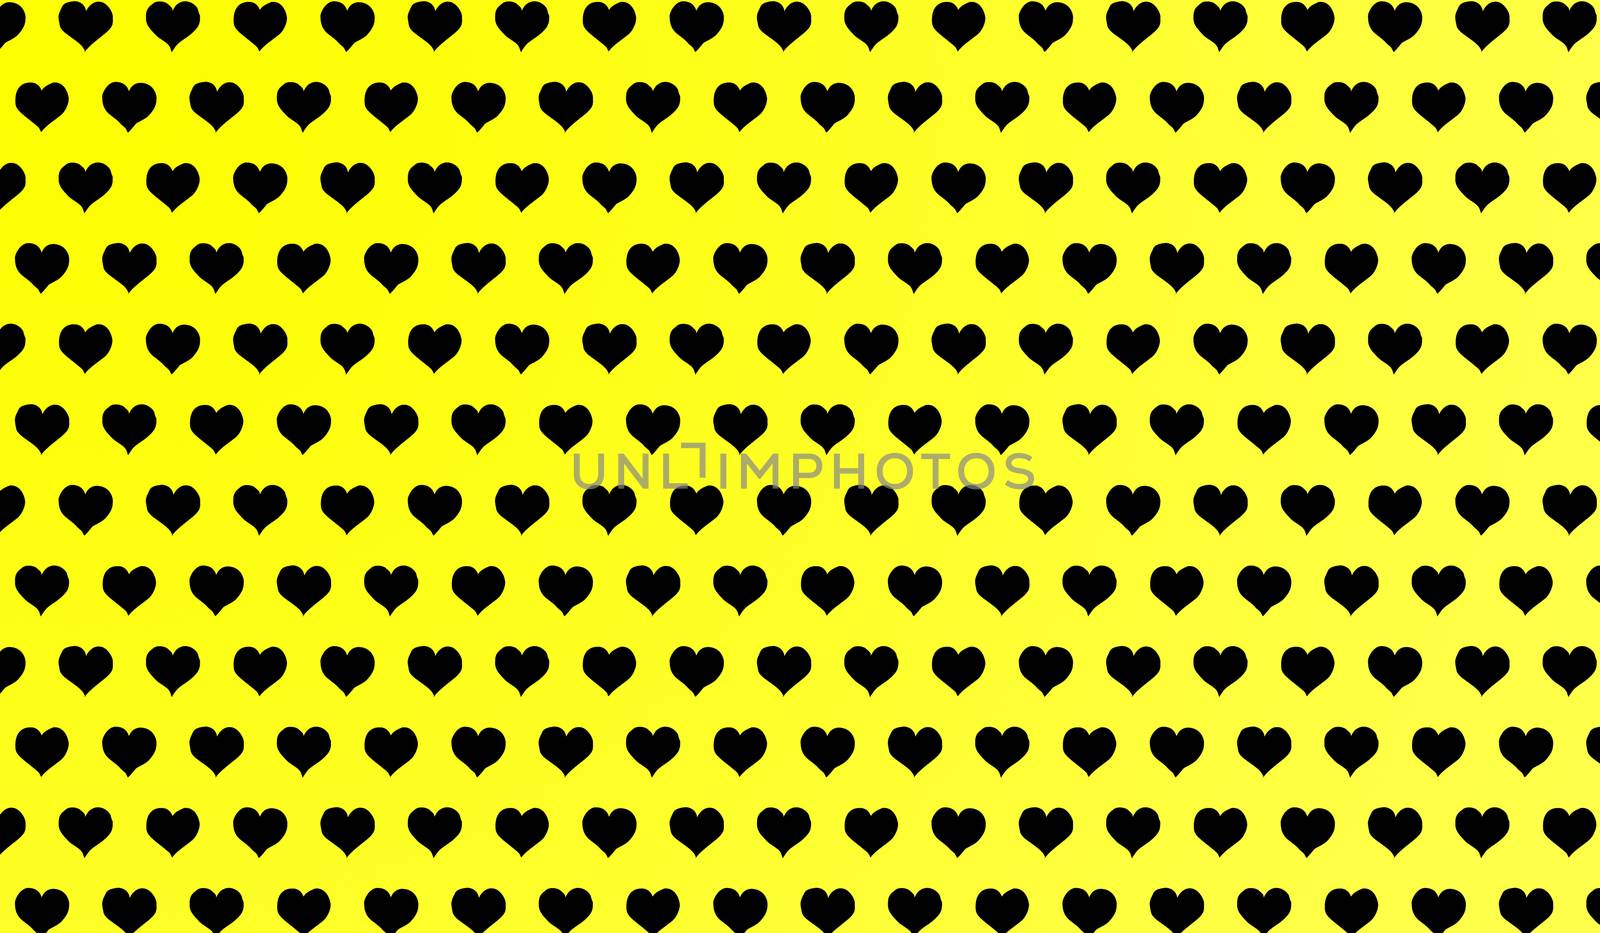 2d yellow pattern of cartoon hearts on isolated background by Andreajk3